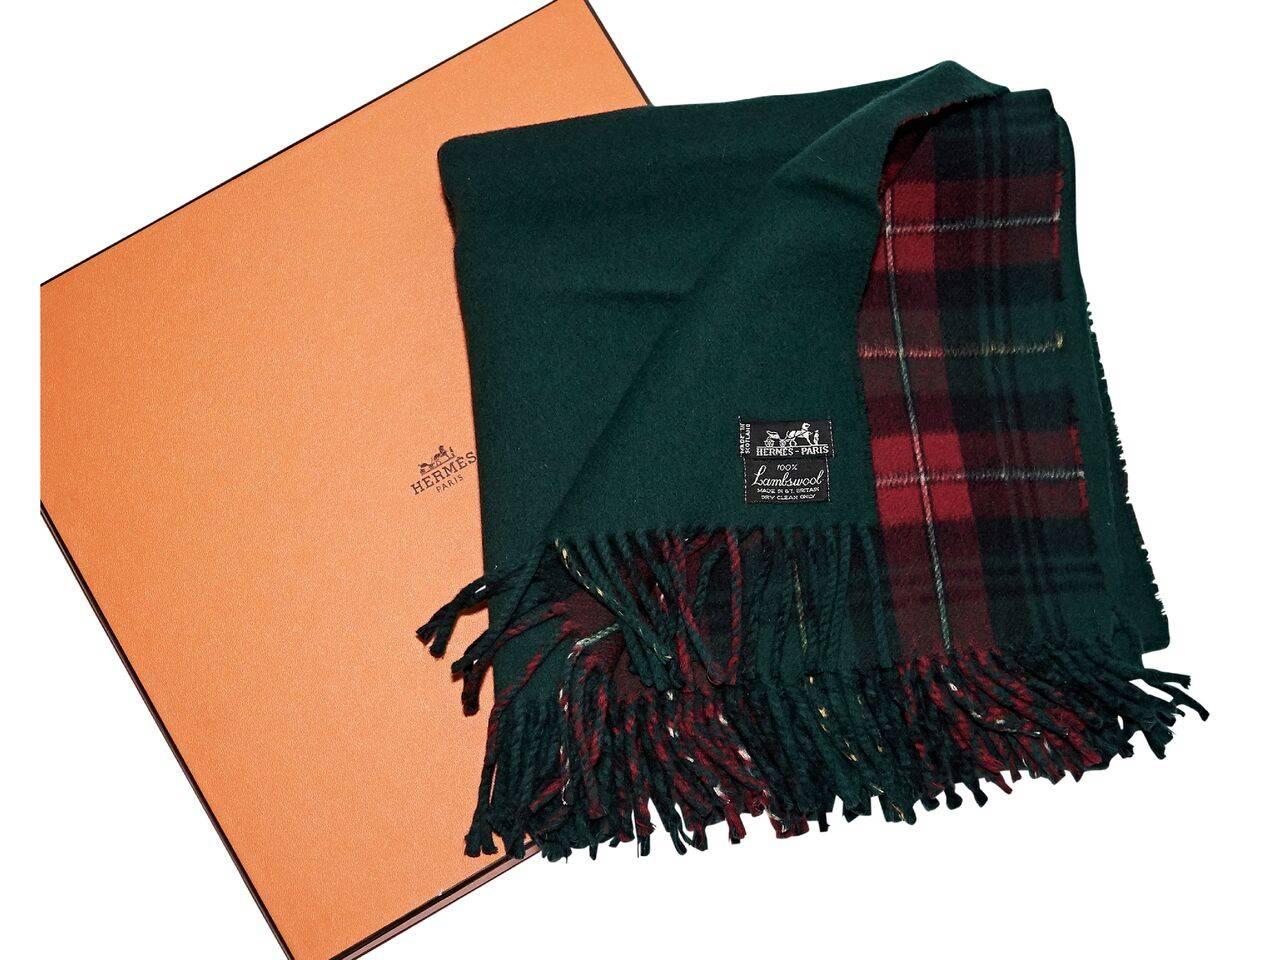 Product details:  Vintage green and red plaid lambswool scarf by Hermes.  Fringe trim.  Original box included. 
Condition: Pre-owned. Very good.
Est. Retail $ 1,500.00